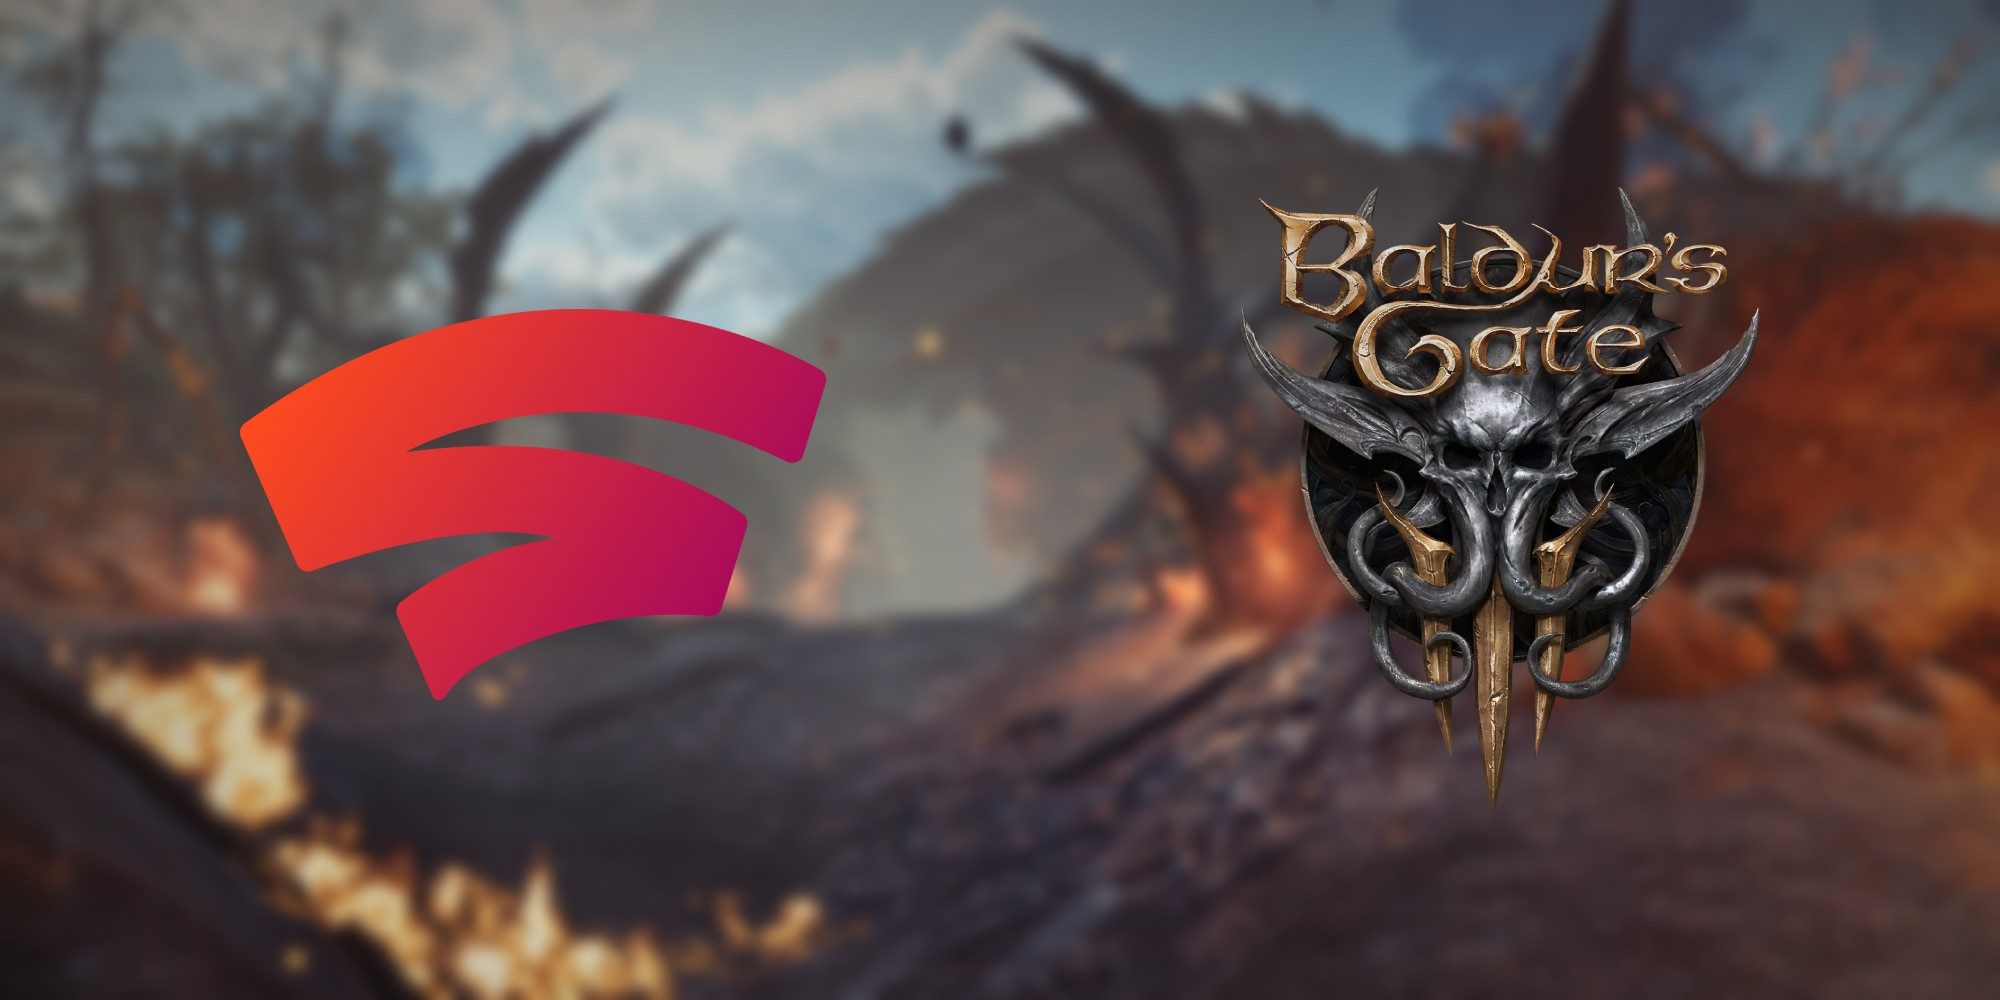 Baldur's Gate 3 arrives on Stadia in Early Access next month